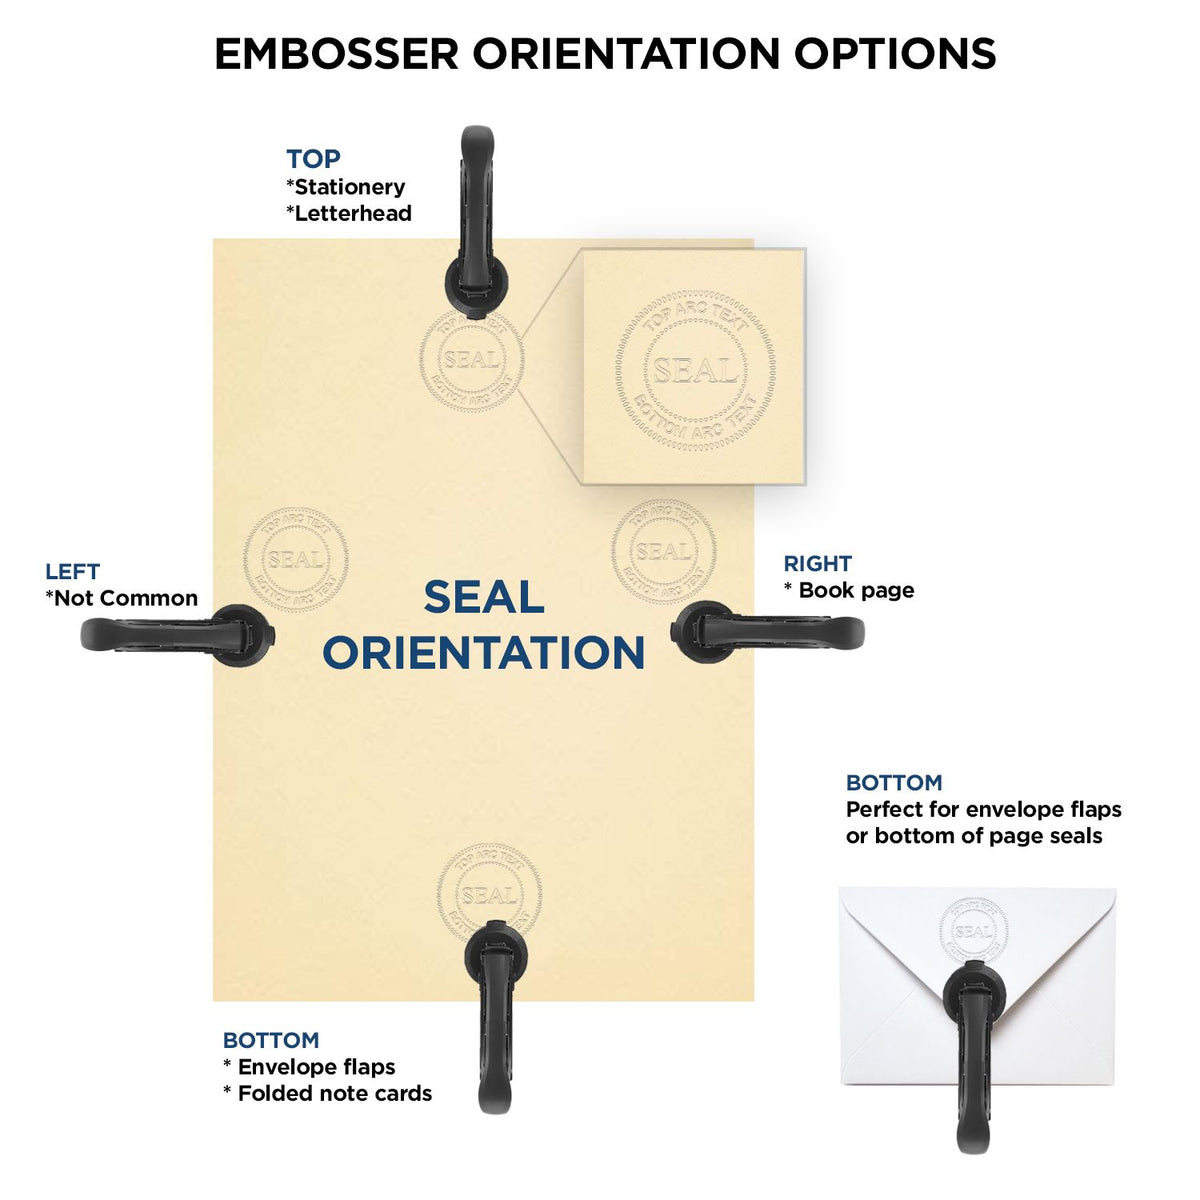 An infographic for the State of Missouri Long Reach Architectural Embossing Seal showing embosser orientation, this is showing examples of a top, bottom, right and left insert.